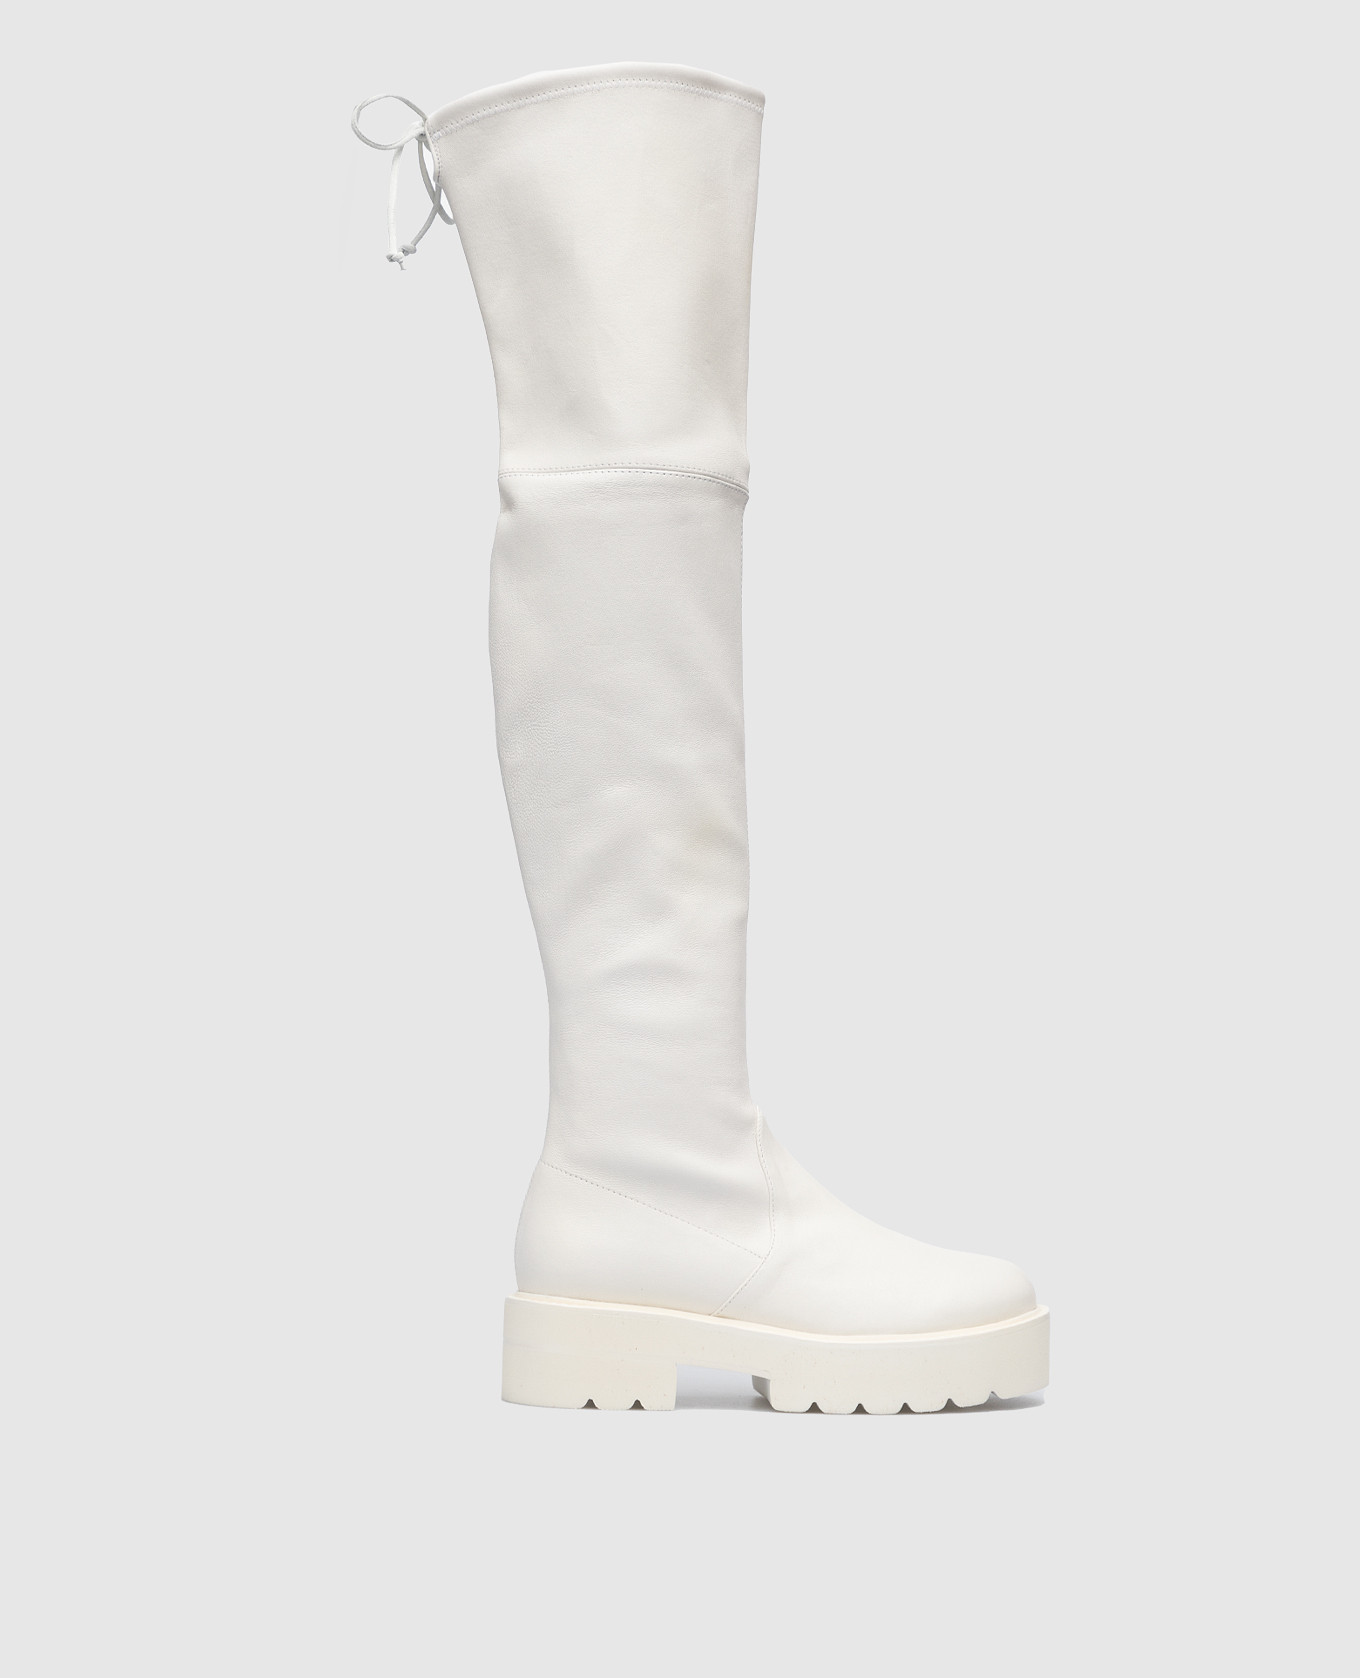 Lowland Ultralift white leather boots